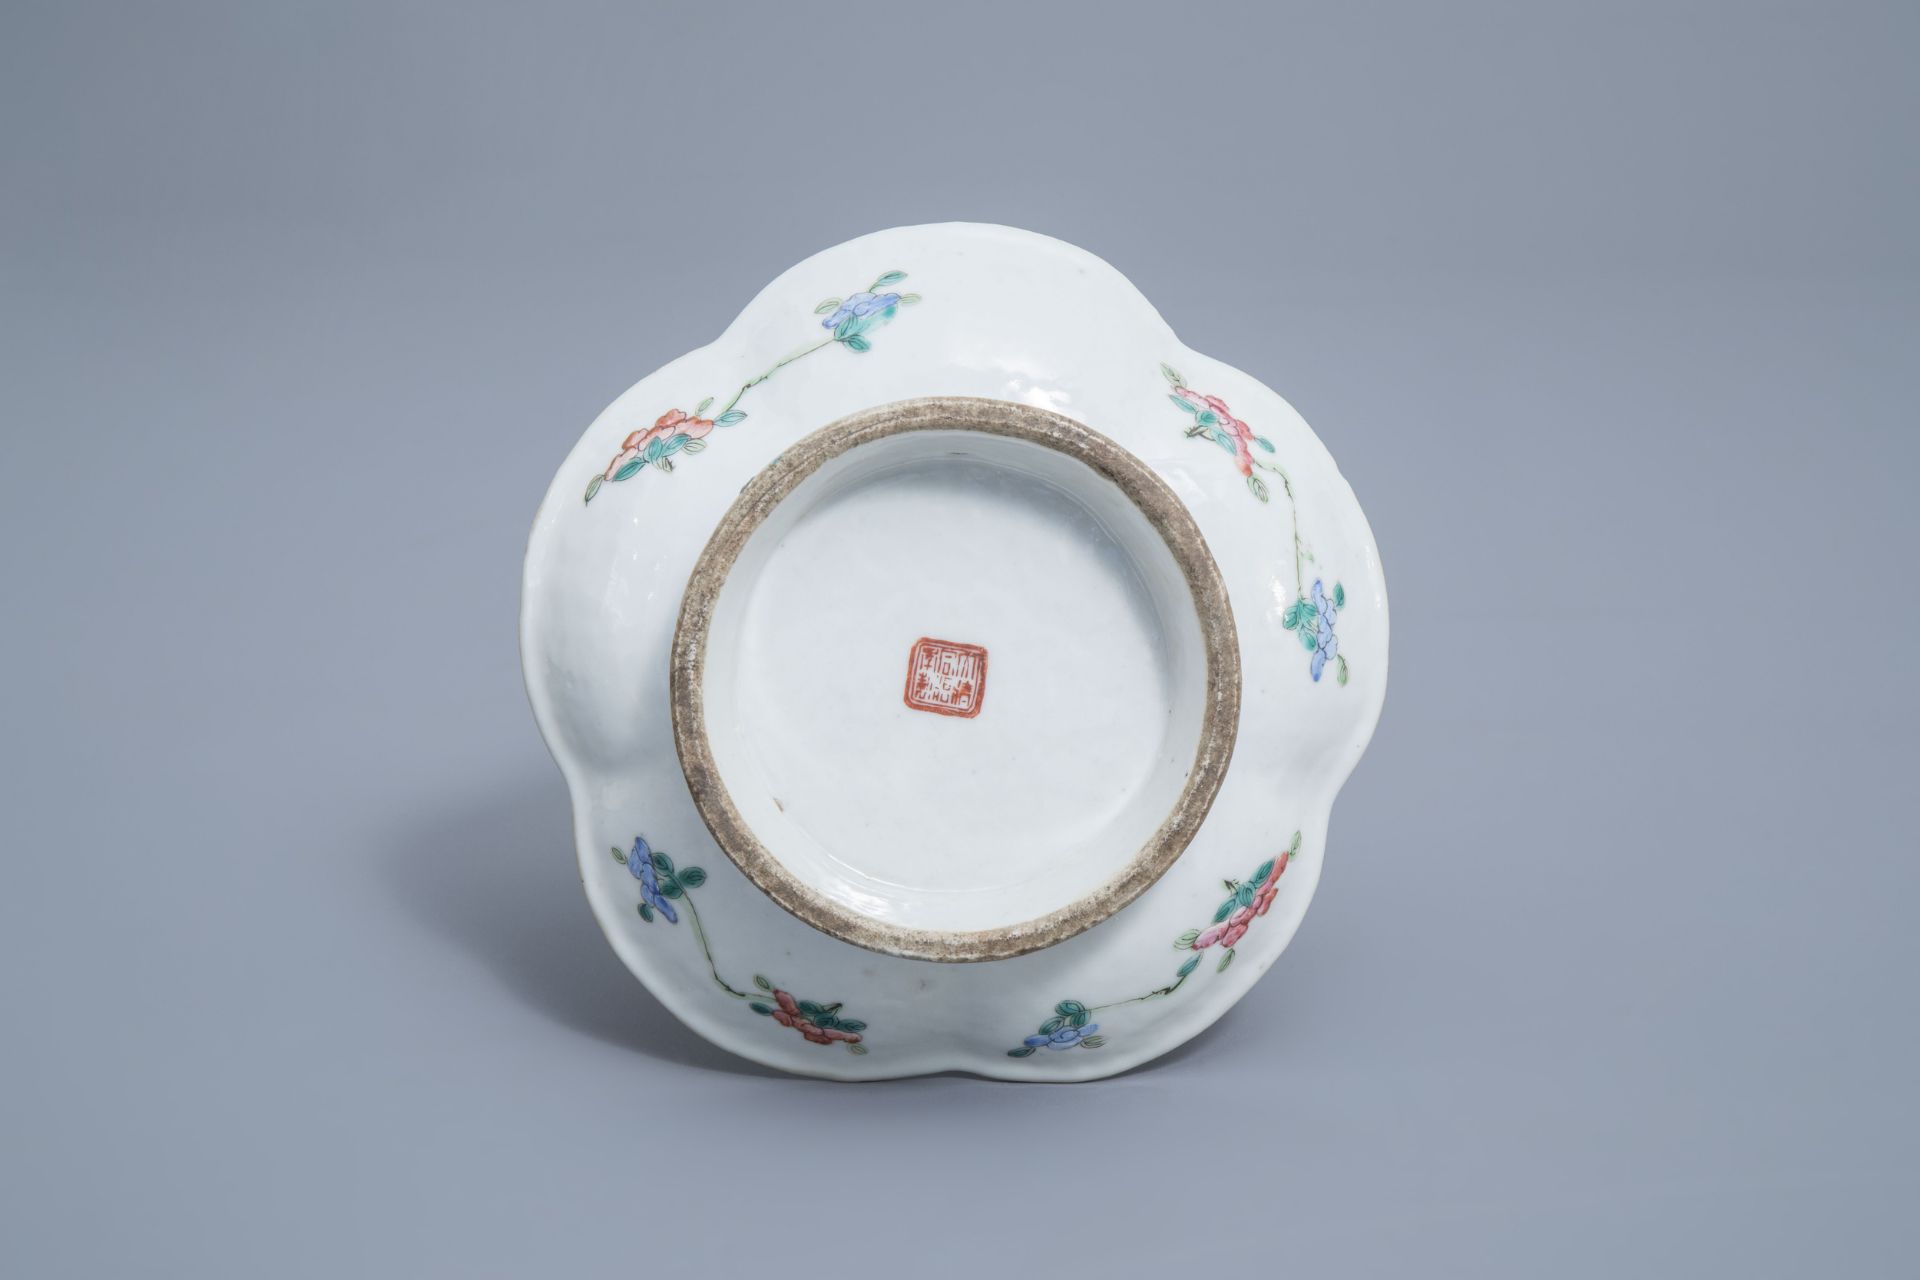 A varied collection of Chinse Canton and famille rose porcelain, 19th C. - Image 7 of 19